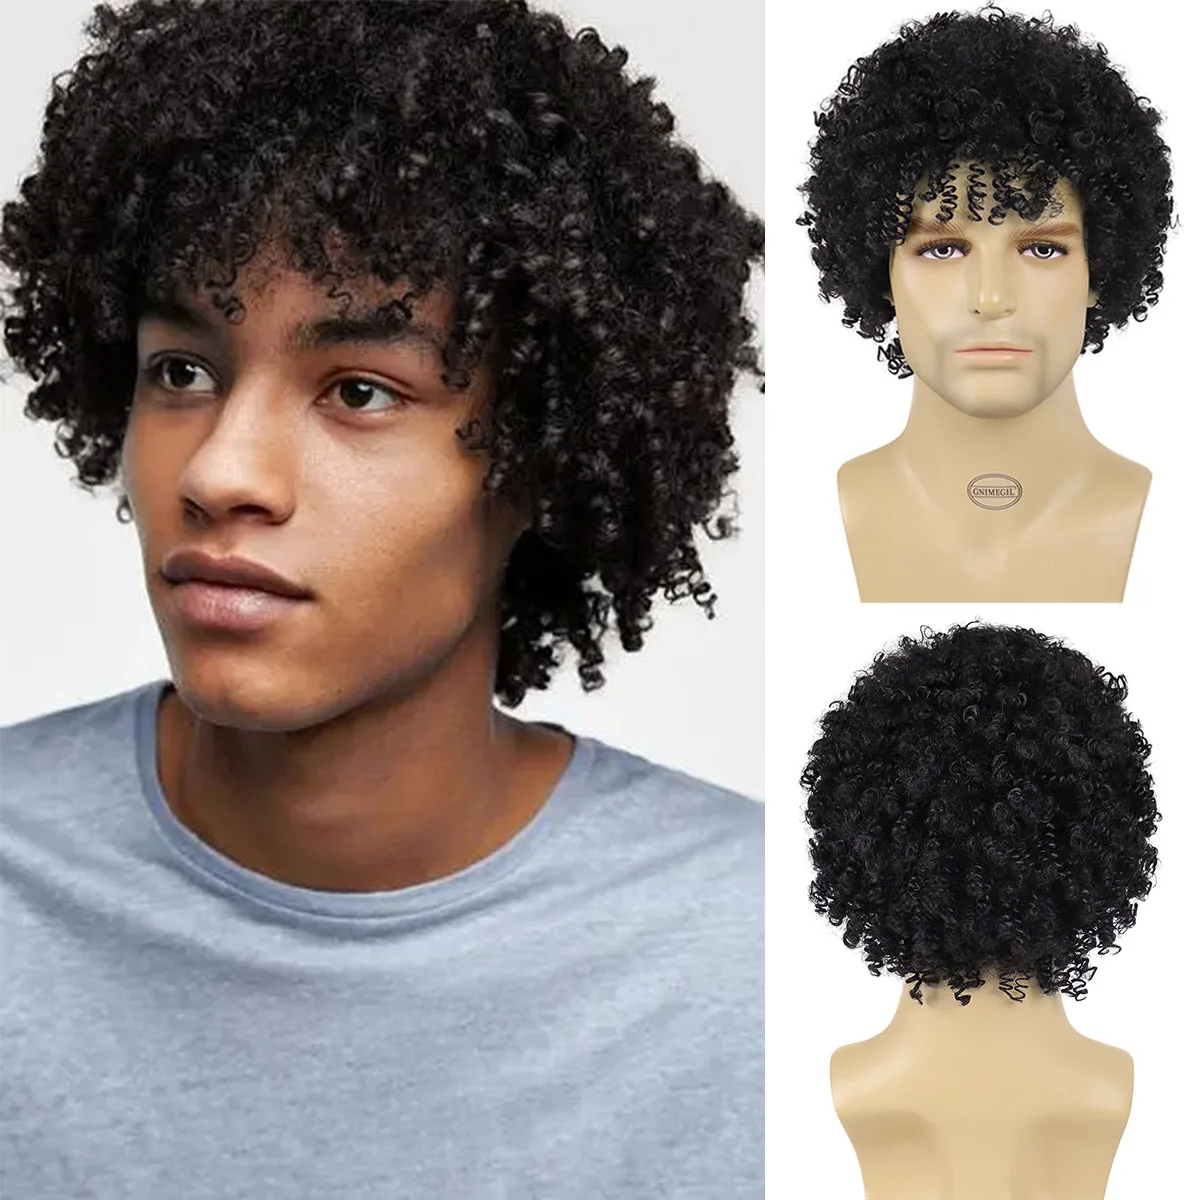 GNIMEGIL Synthetic Short Black Hair Afro Kinky Curly Wig with Bangs Natural Fluffy Wig for Black Men Cosplay High Temperature